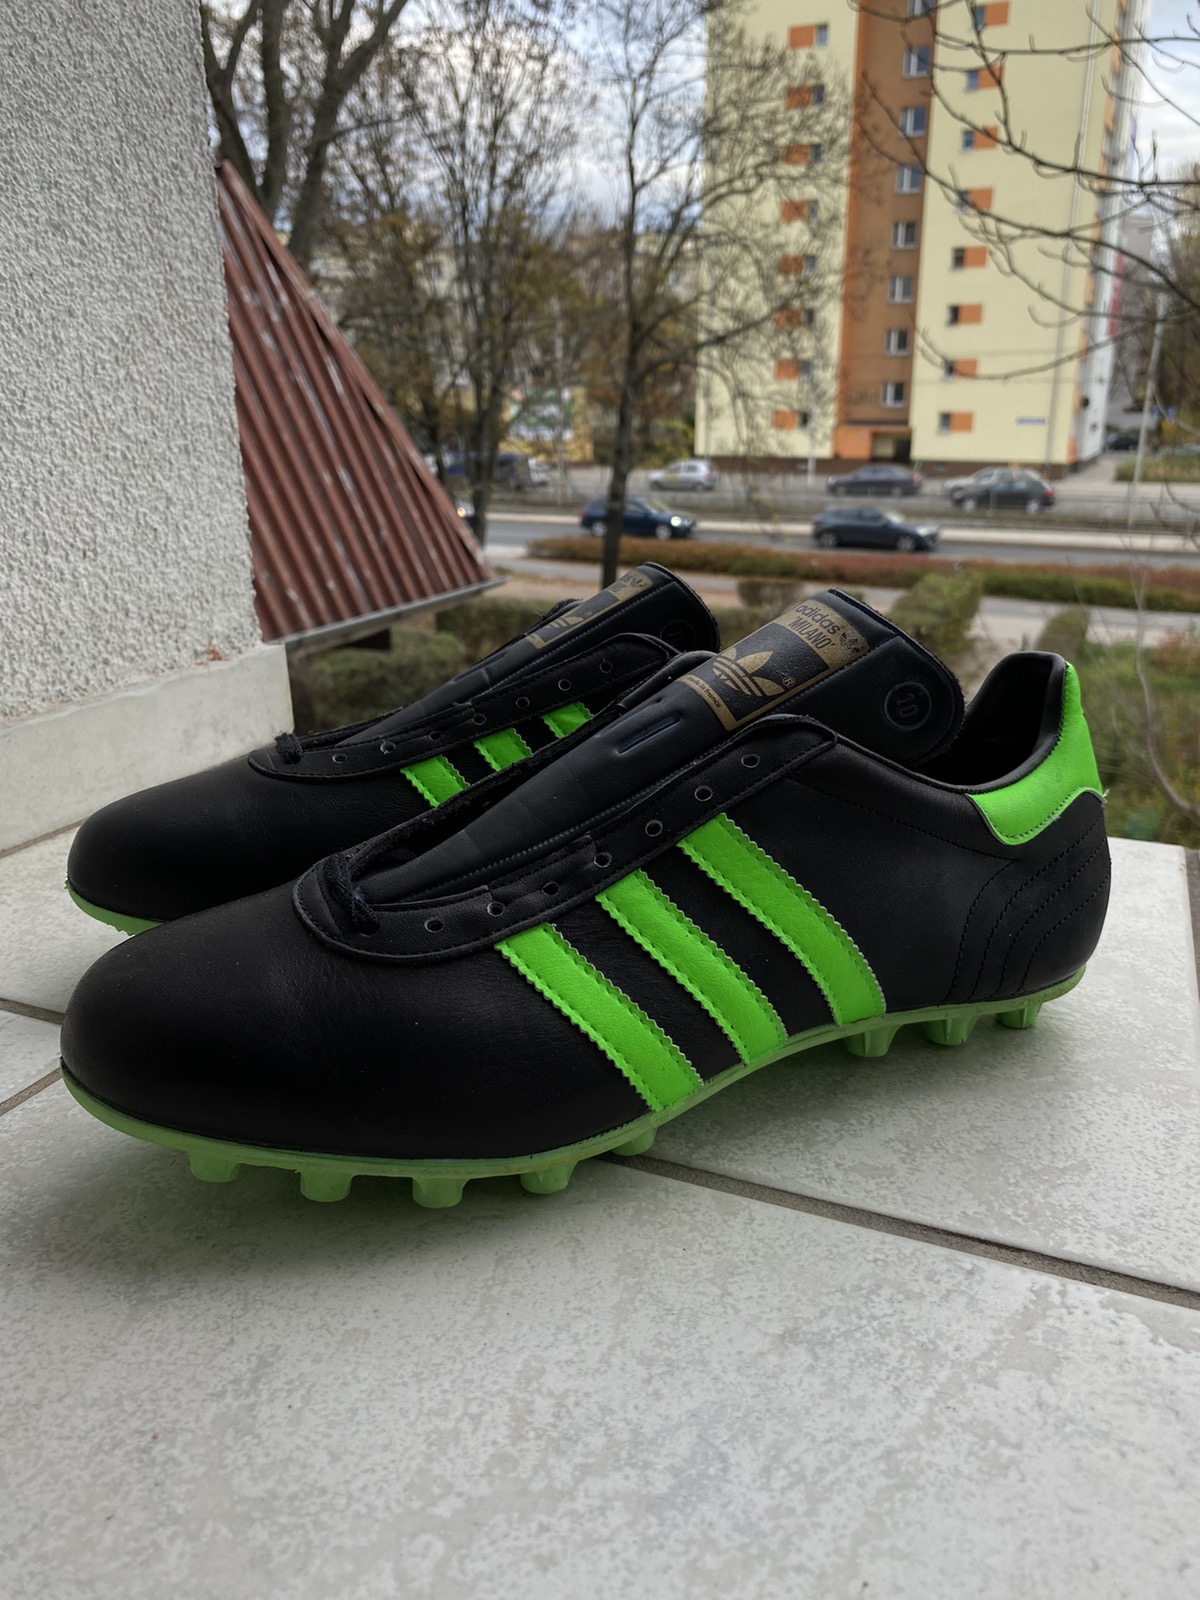 Adidas Milano made in France football boots 70-80s - 6